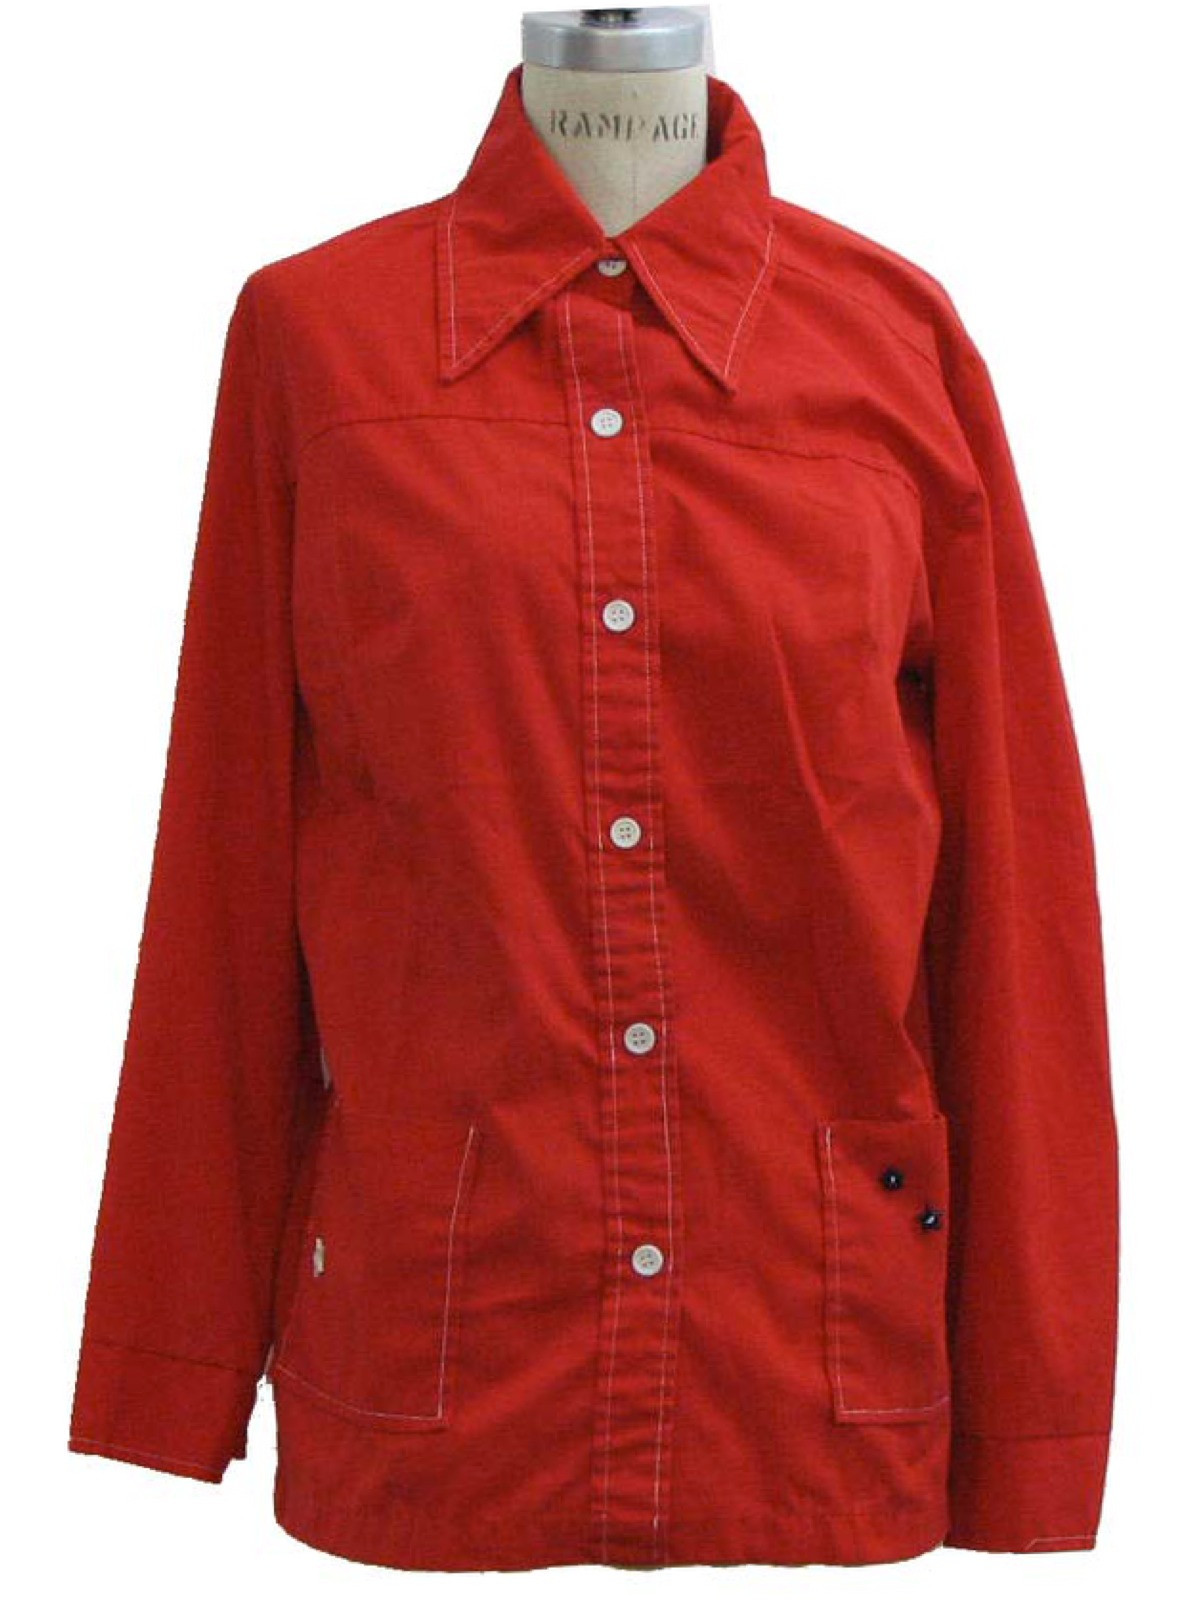 Retro 1970's Shirt (Sears) : 70s -Sears- Womens red blended cotton ...